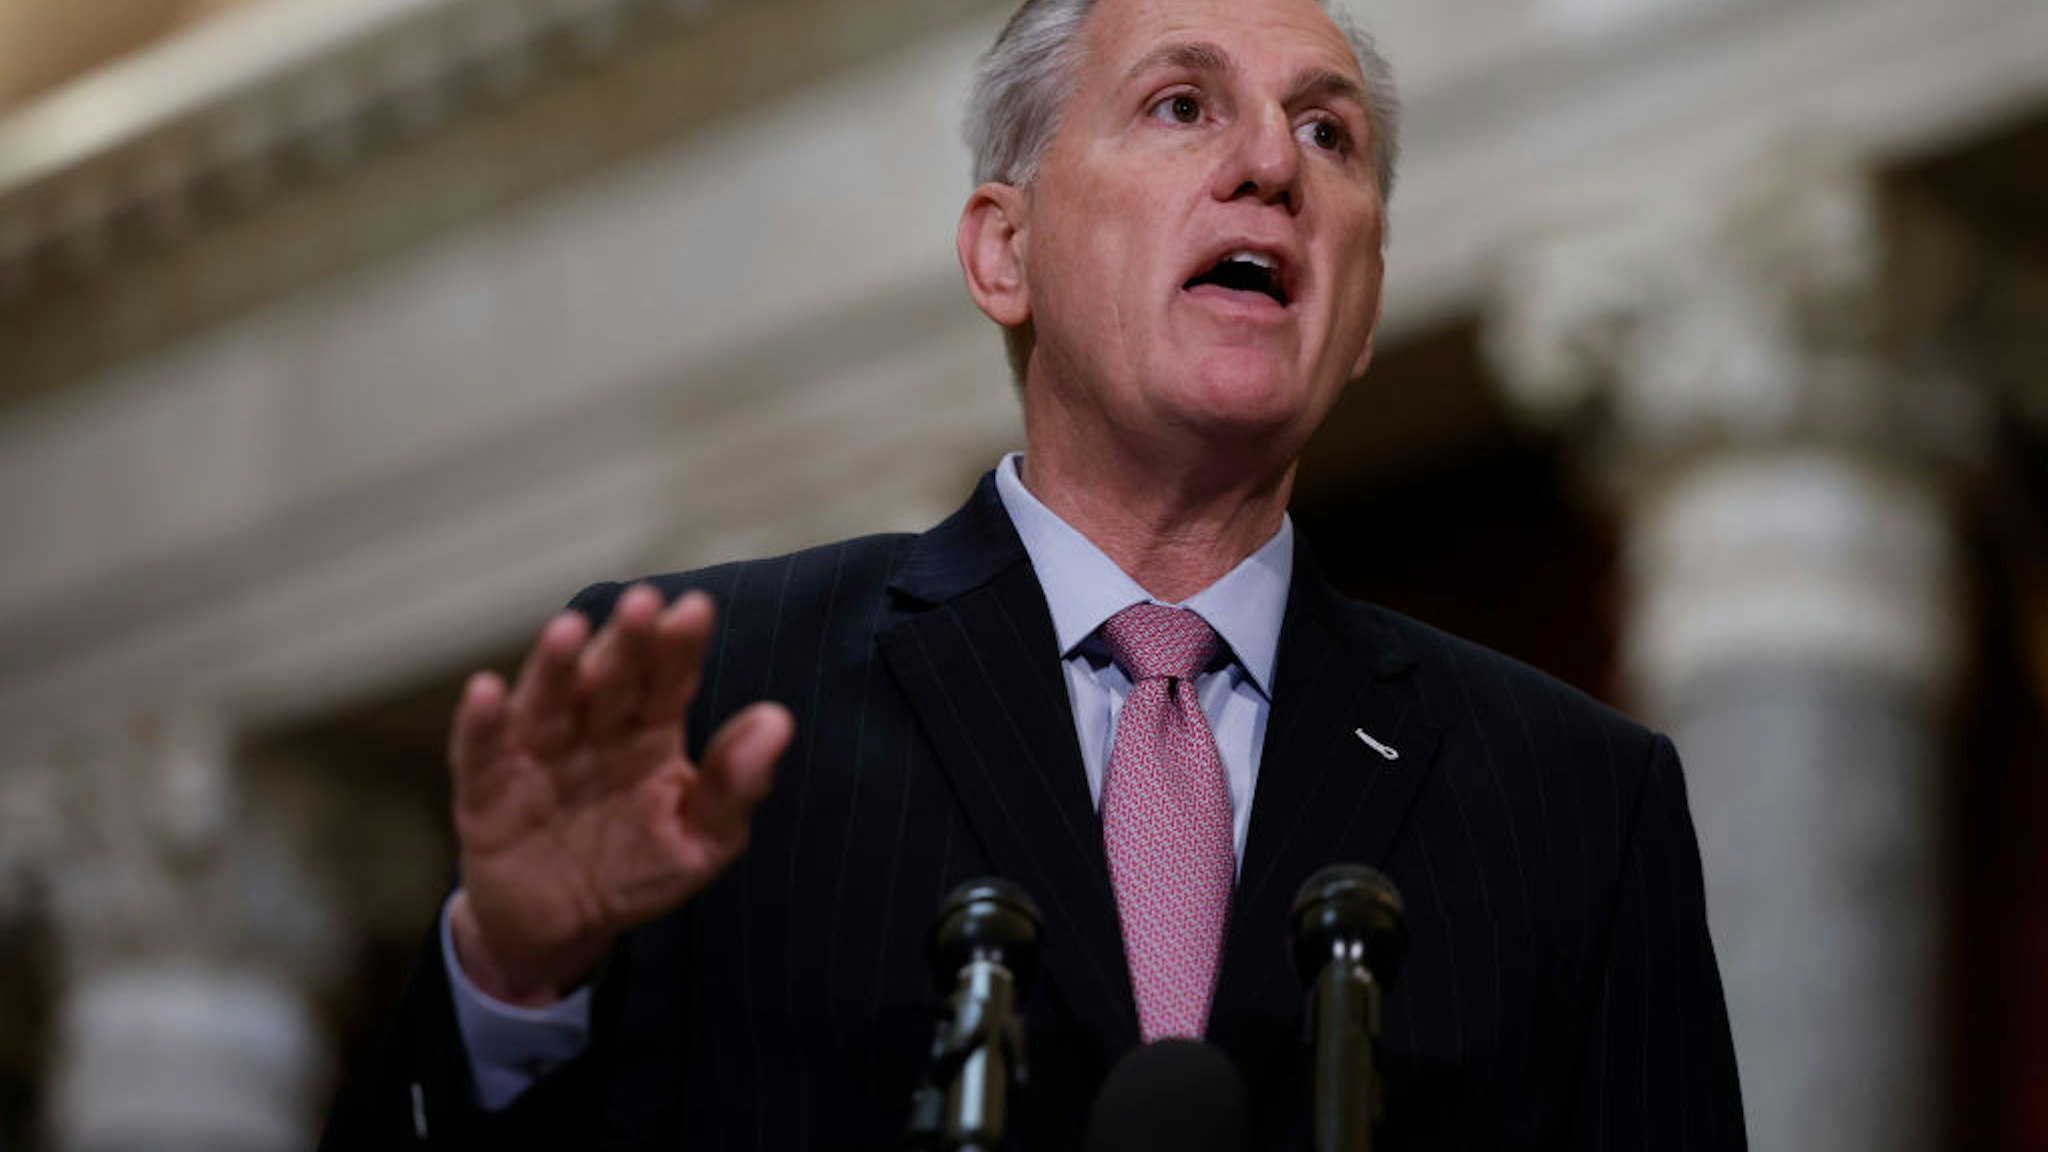 WASHINGTON, DC - JANUARY 12: U.S. Speaker Kevin McCarthy (R-CA) speaks at a news conference in Statuary Hall of the U.S. Capitol Building on January 12, 2023 in Washington, DC. During his news conference, McCarthy discussed a range of topics including recent classified documents found inside an office used by U.S. President Joe Biden after his time as vice president and committee assignments for Rep. George Santos (R-NY). (Photo by Anna Moneymaker/Getty Images)